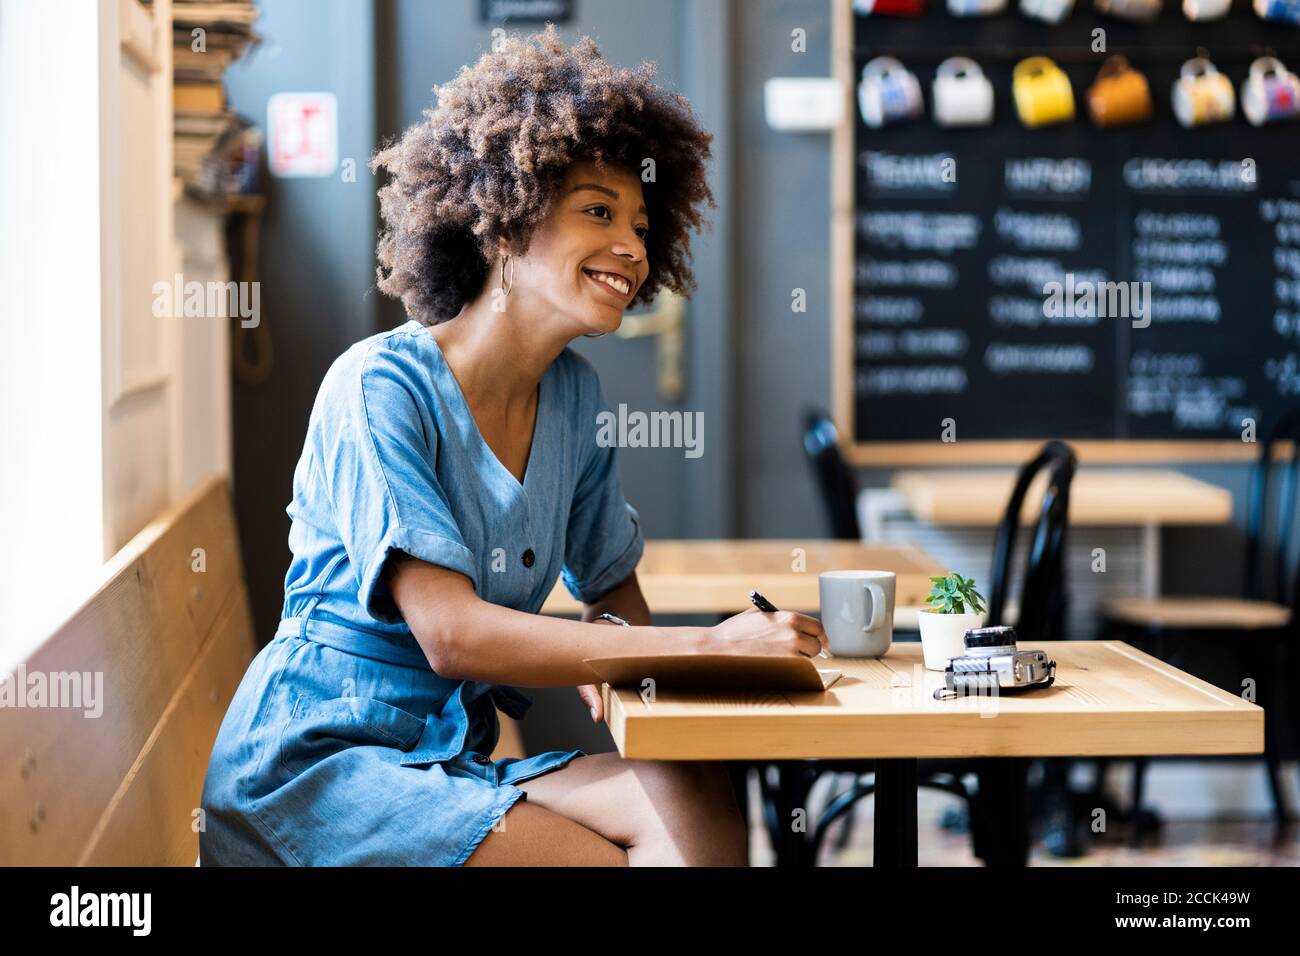 Thoughtful woman writing in book while sitting at table in coffee shop Stock Photo